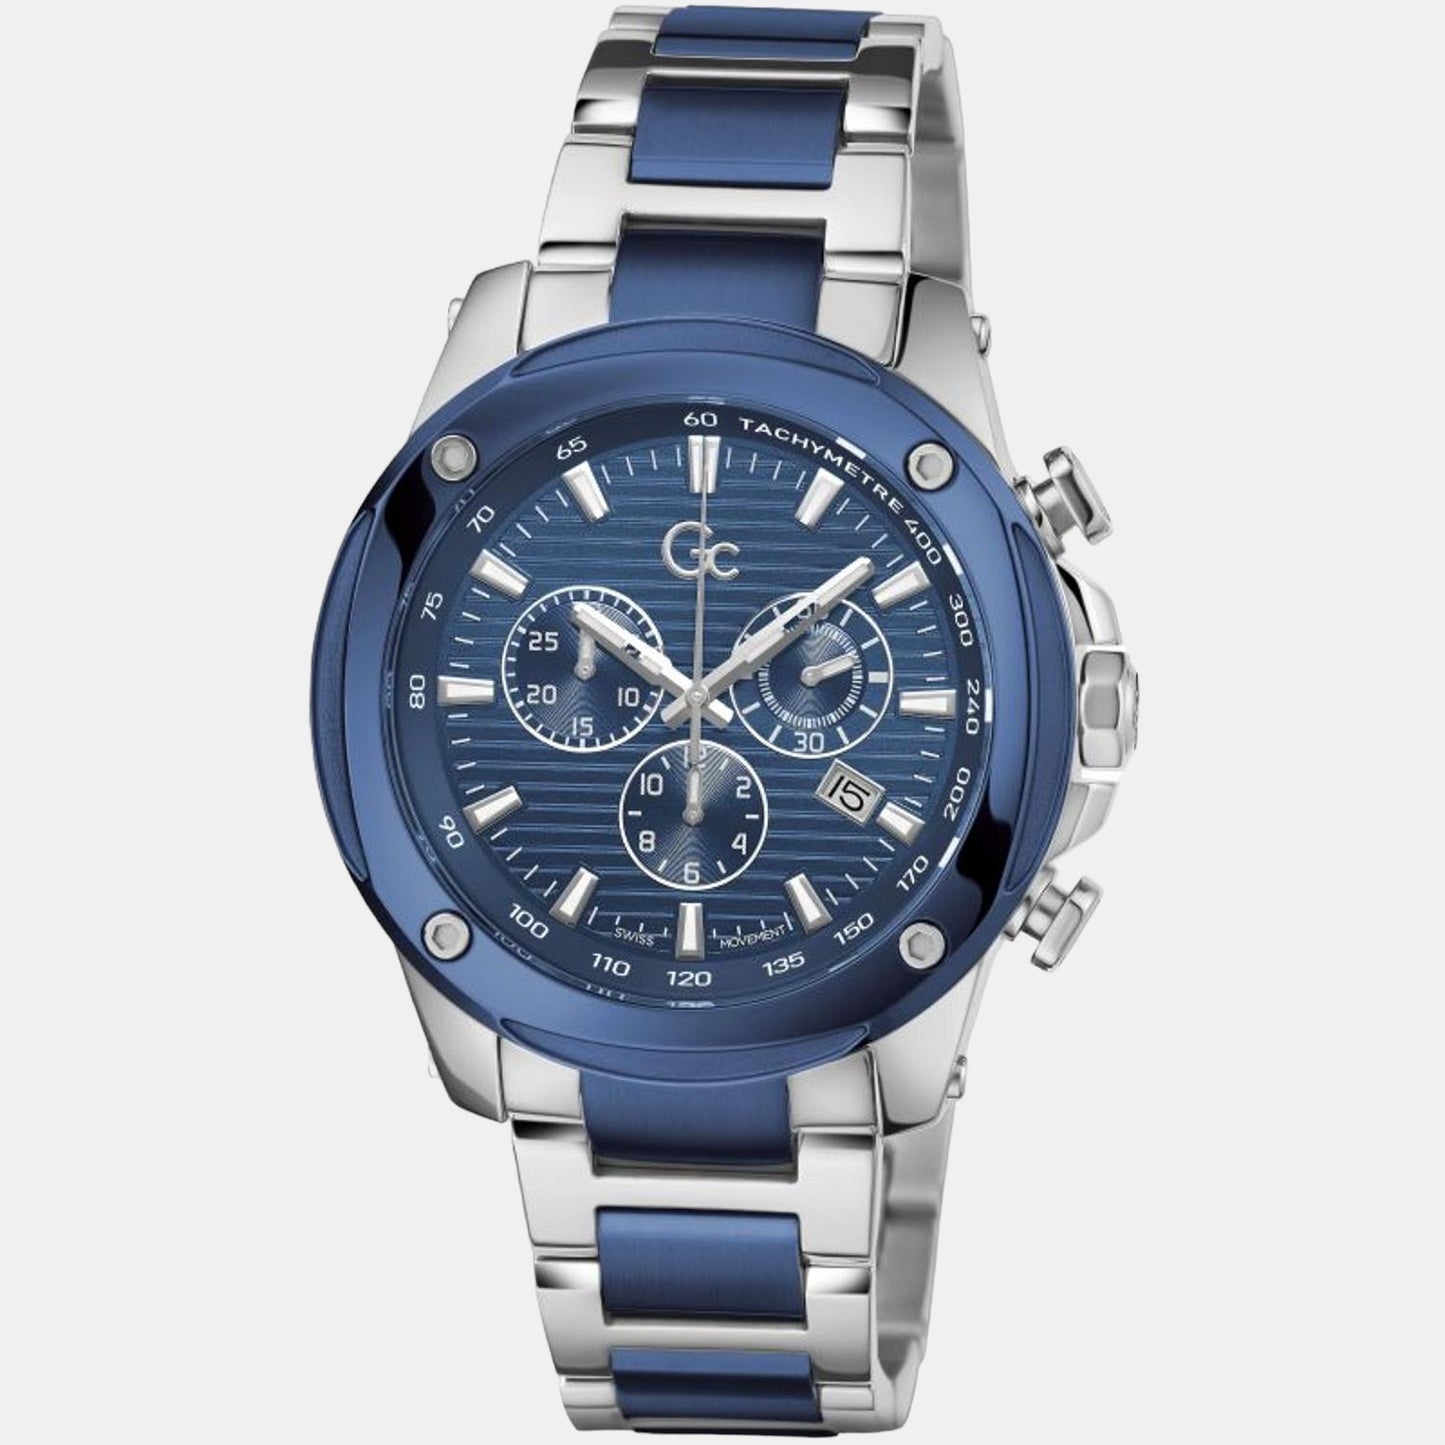 gc-stainless-steel-blue-analog-male-watch-z13002g7mf